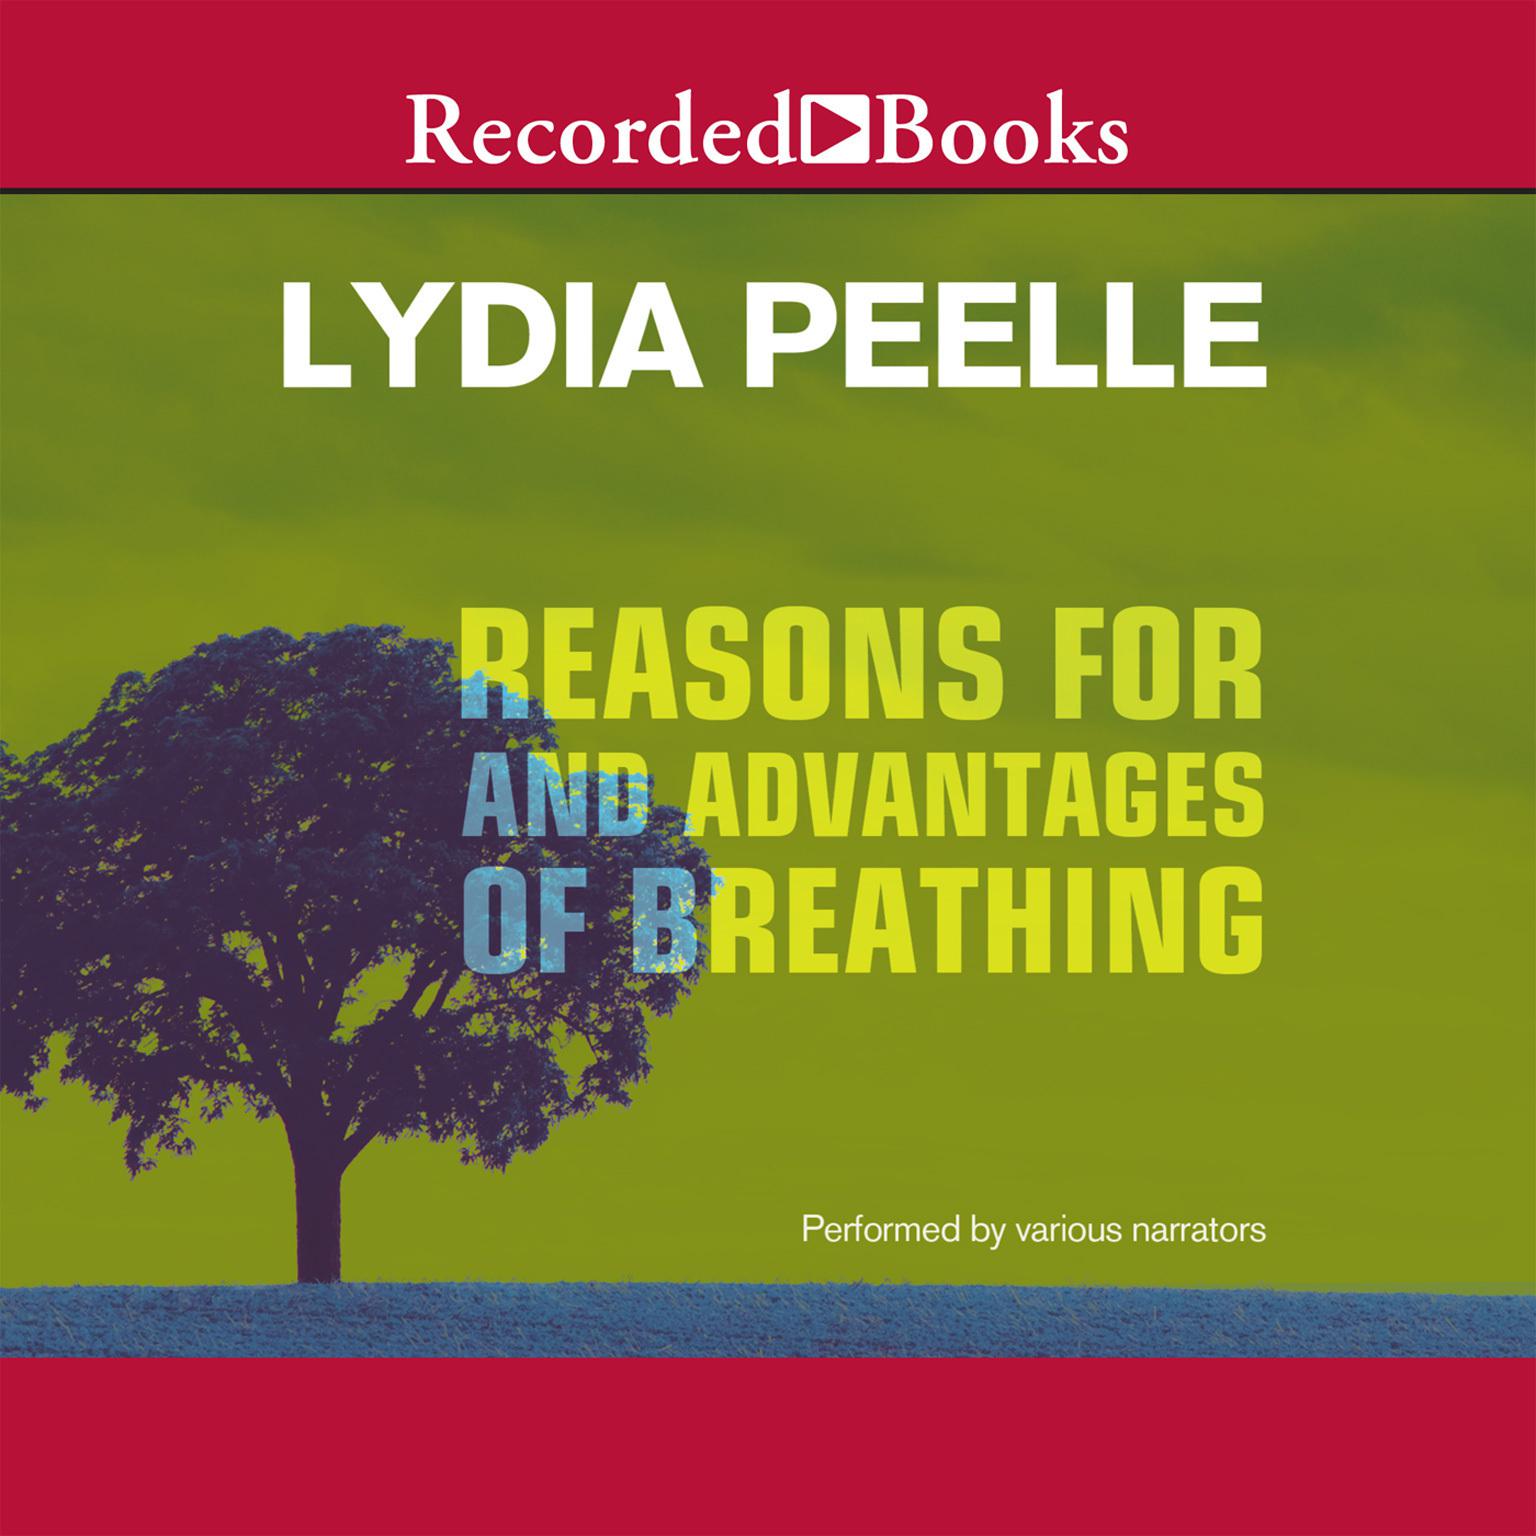 Reasons for and Advantages of Breathing Audiobook, by Lydia Peelle